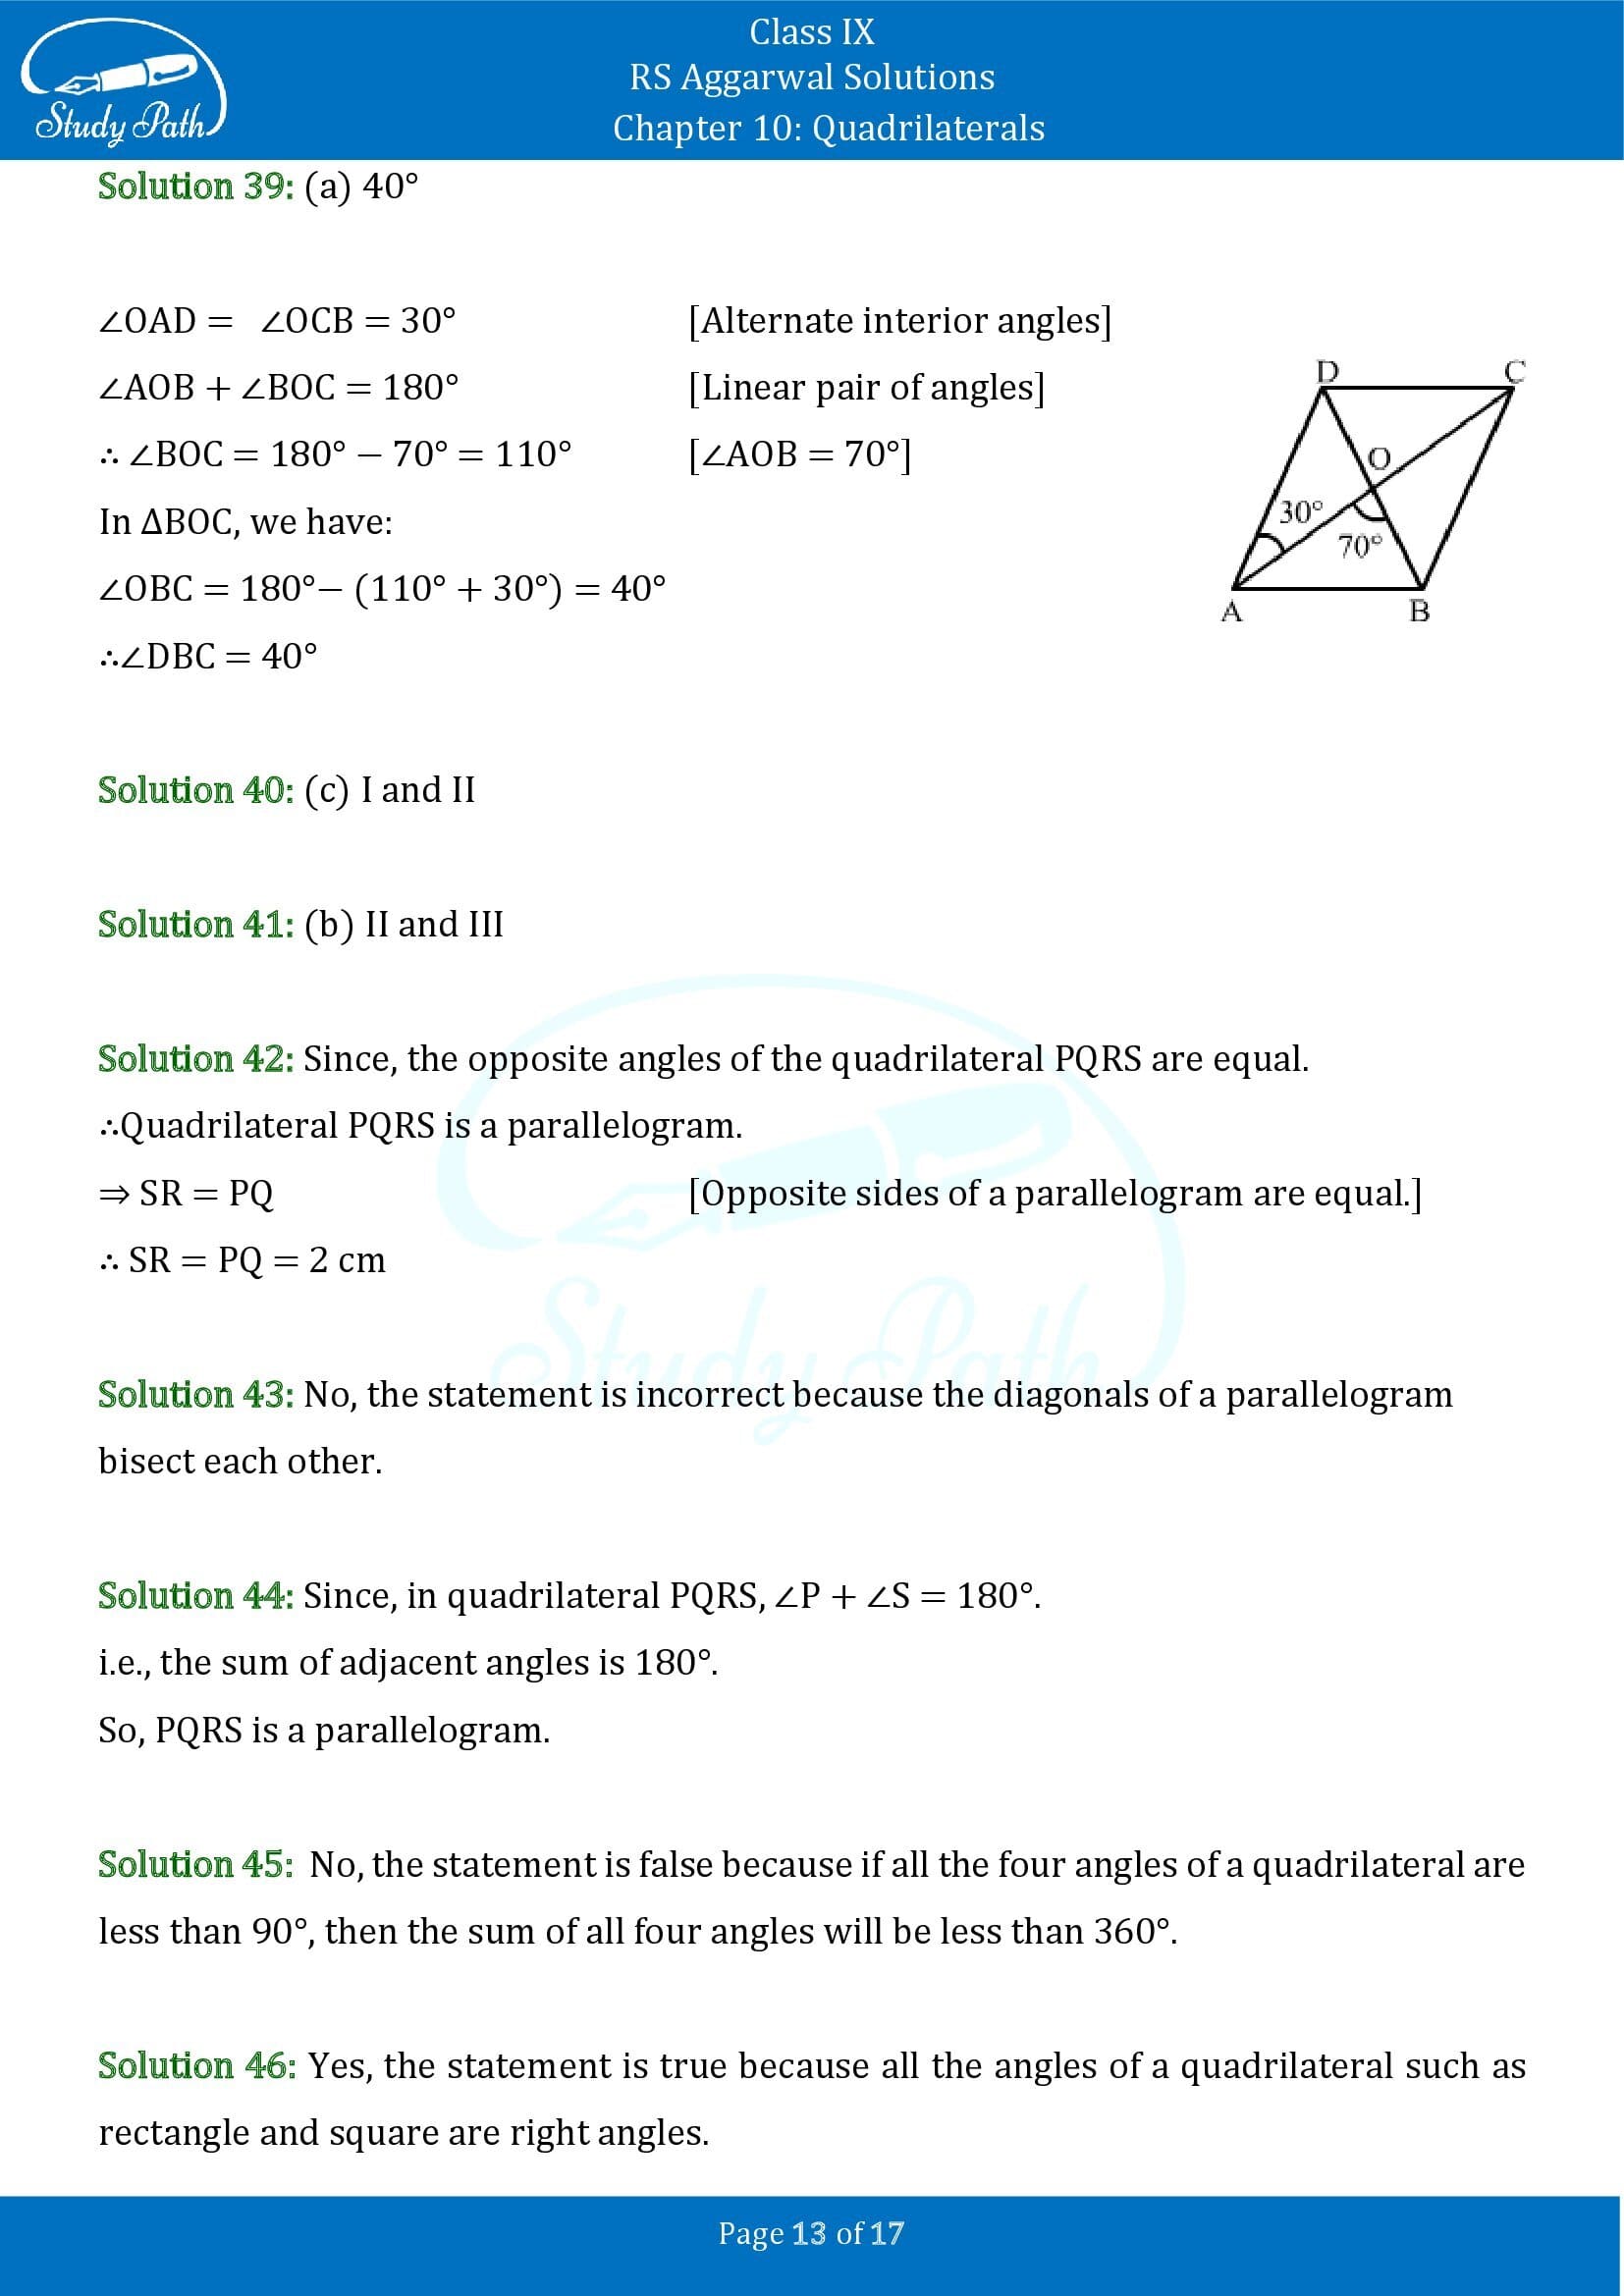 RS Aggarwal Solutions Class 9 Chapter 10 Quadrilaterals Multiple Choice Questions MCQs 00013